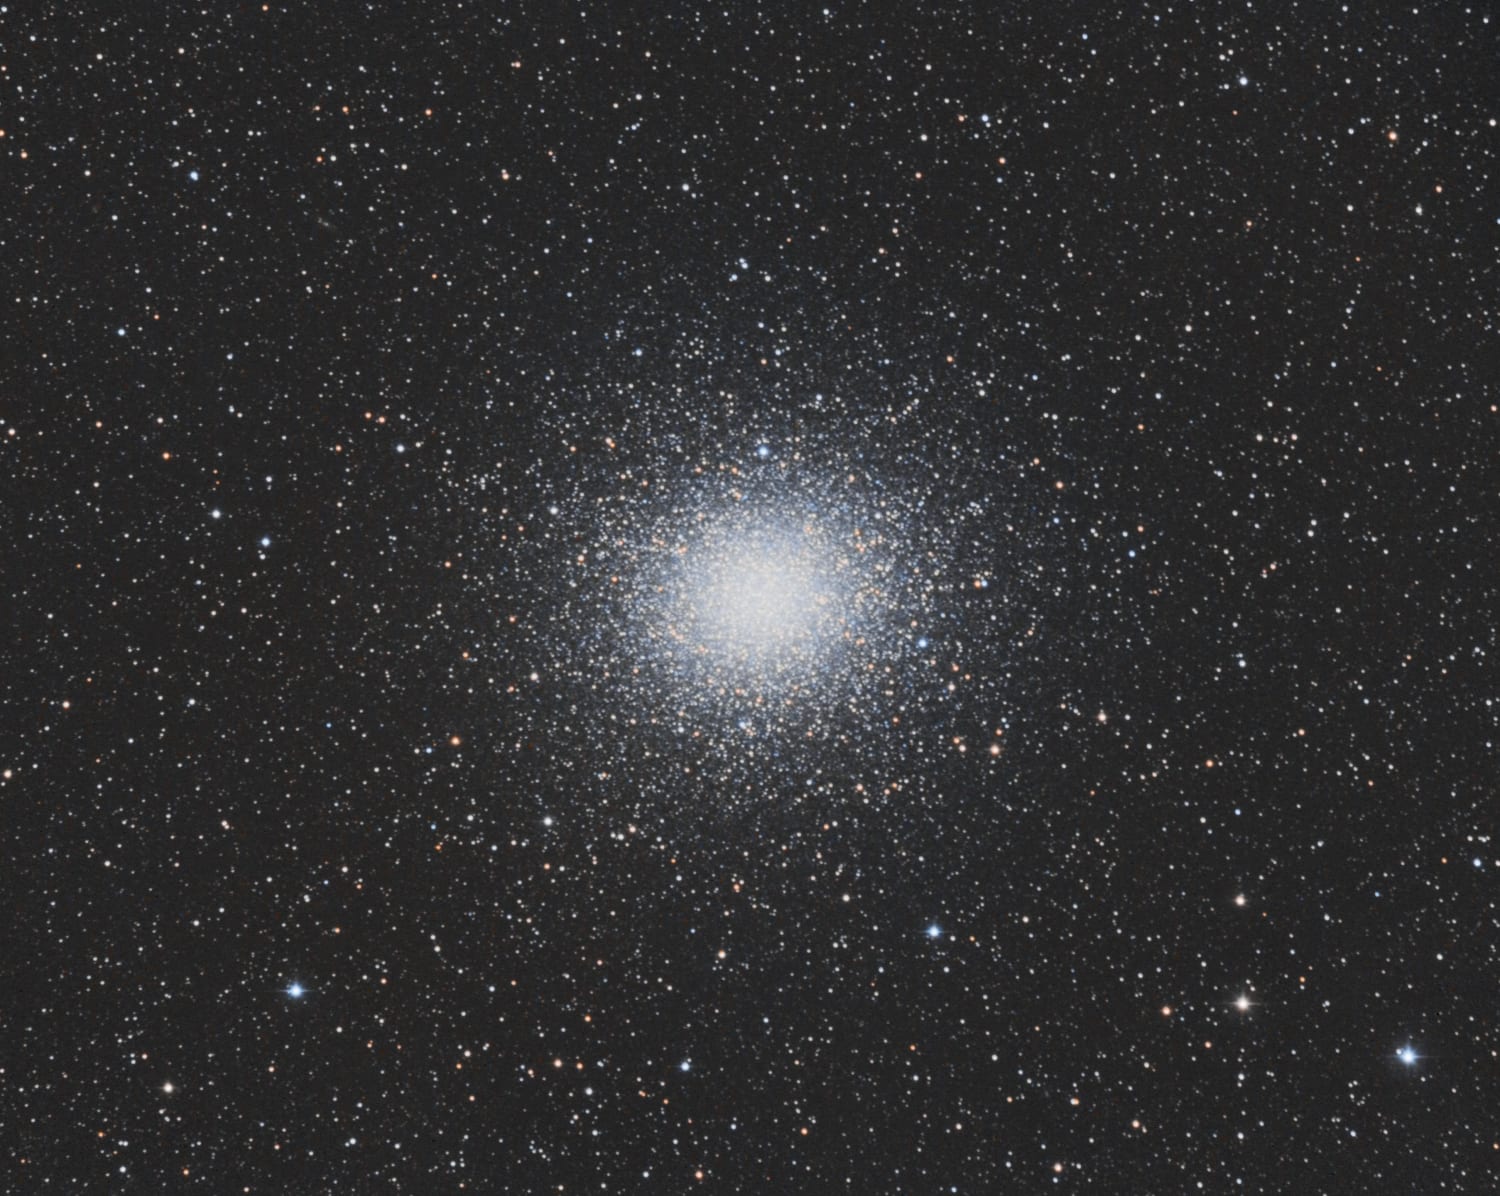 The Omega Centauri star cluster - contain approximately 10 million stars and a total mass equivalent to 4 million solar masses